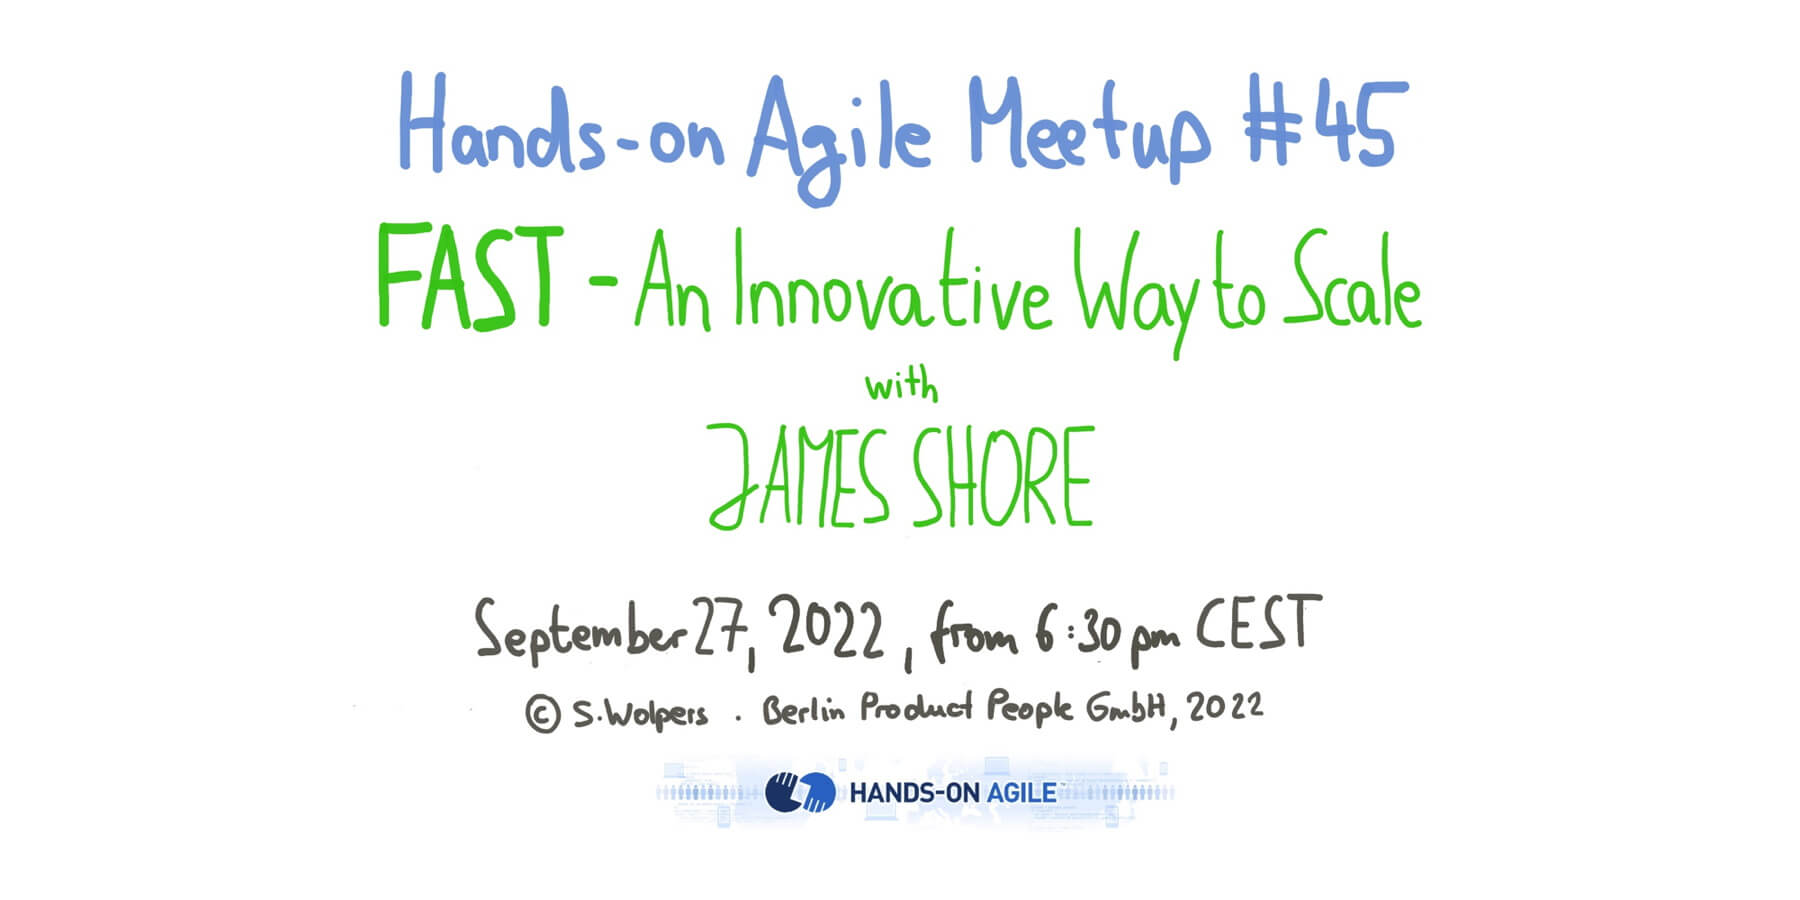 Hands-on Agile #45: FAST: An Innovative Way to Scale w/ James Shore — Berlin Product People GmbH